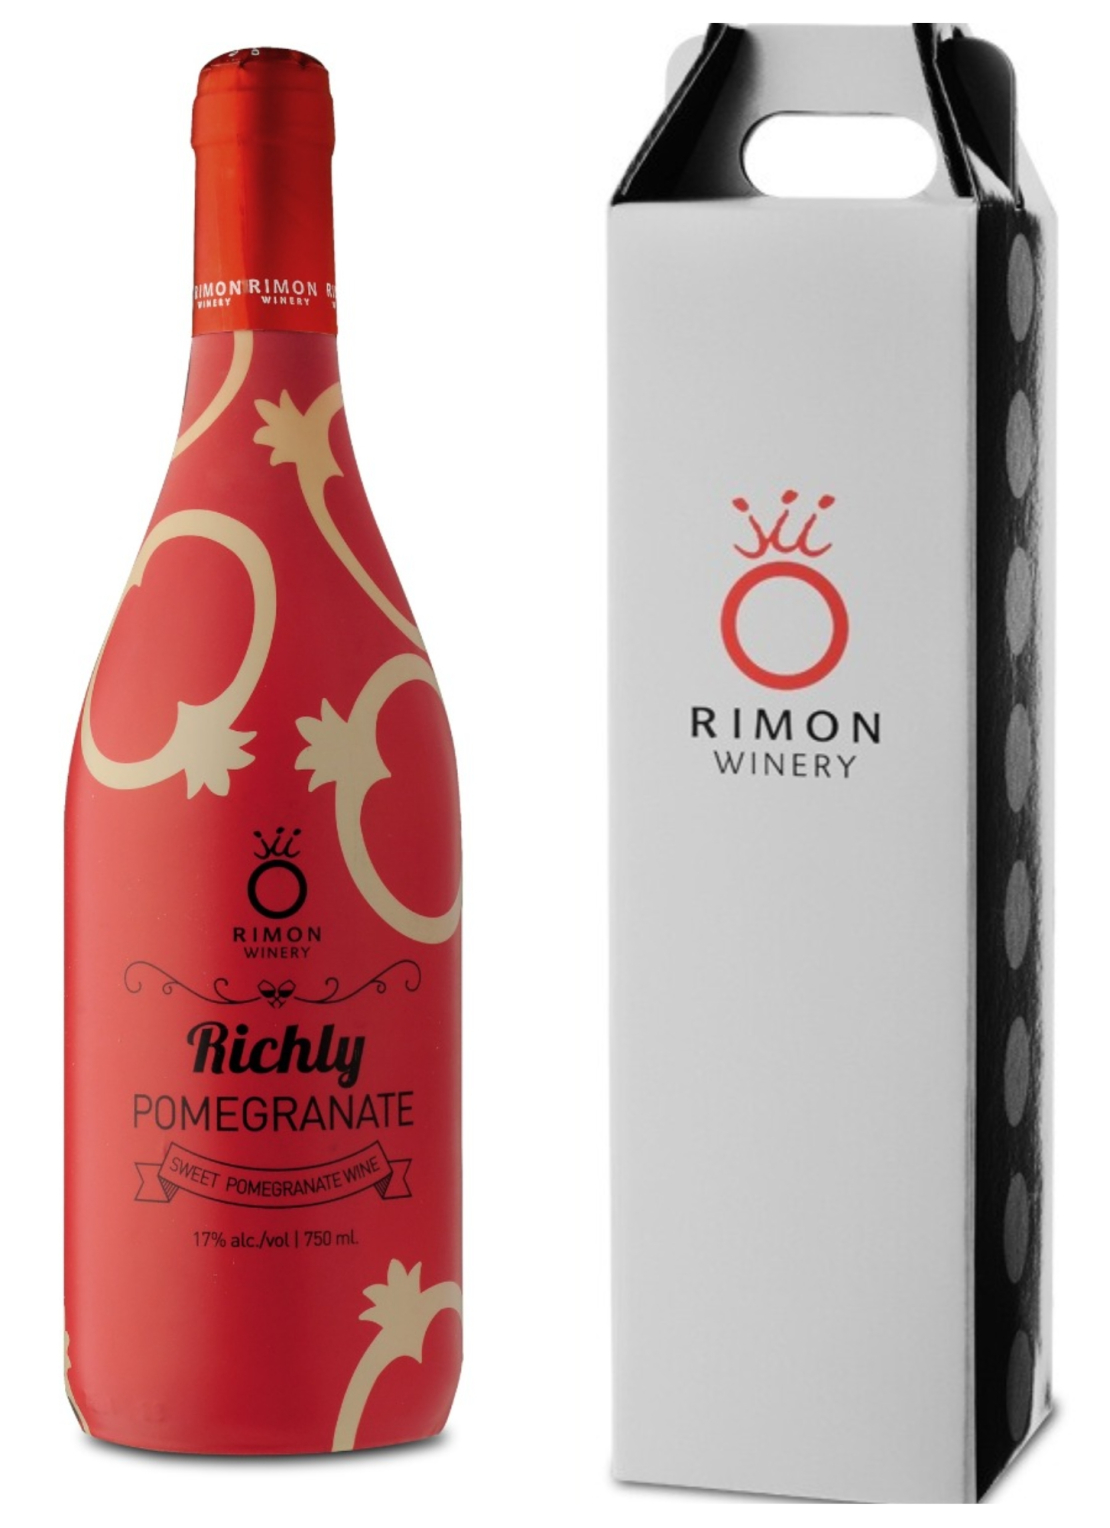 Richly + packeg | RIMON WINERY